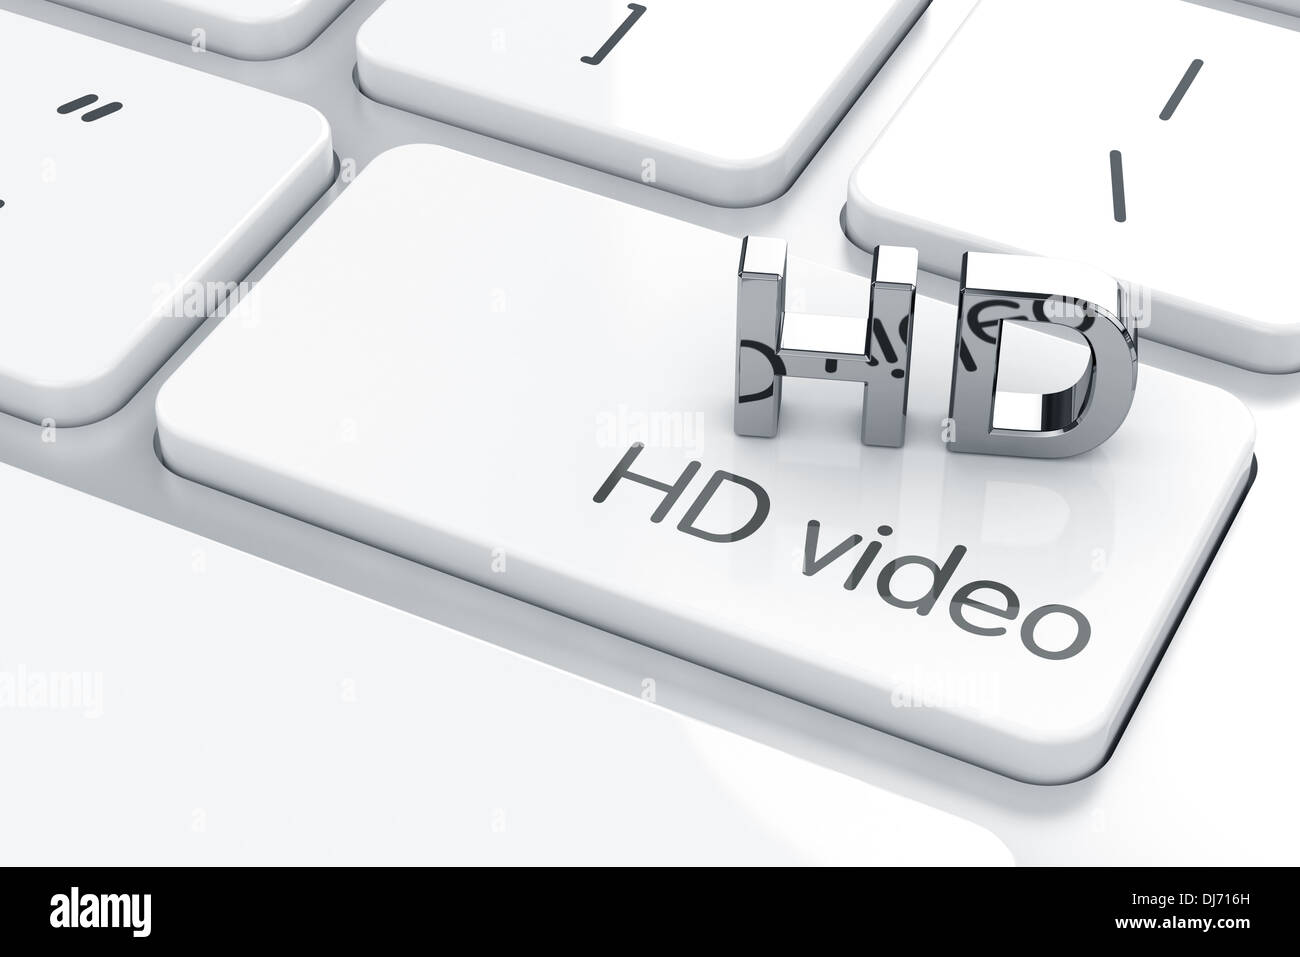 HD chrome icon on the computer keyboard. HD video concept Stock Photo